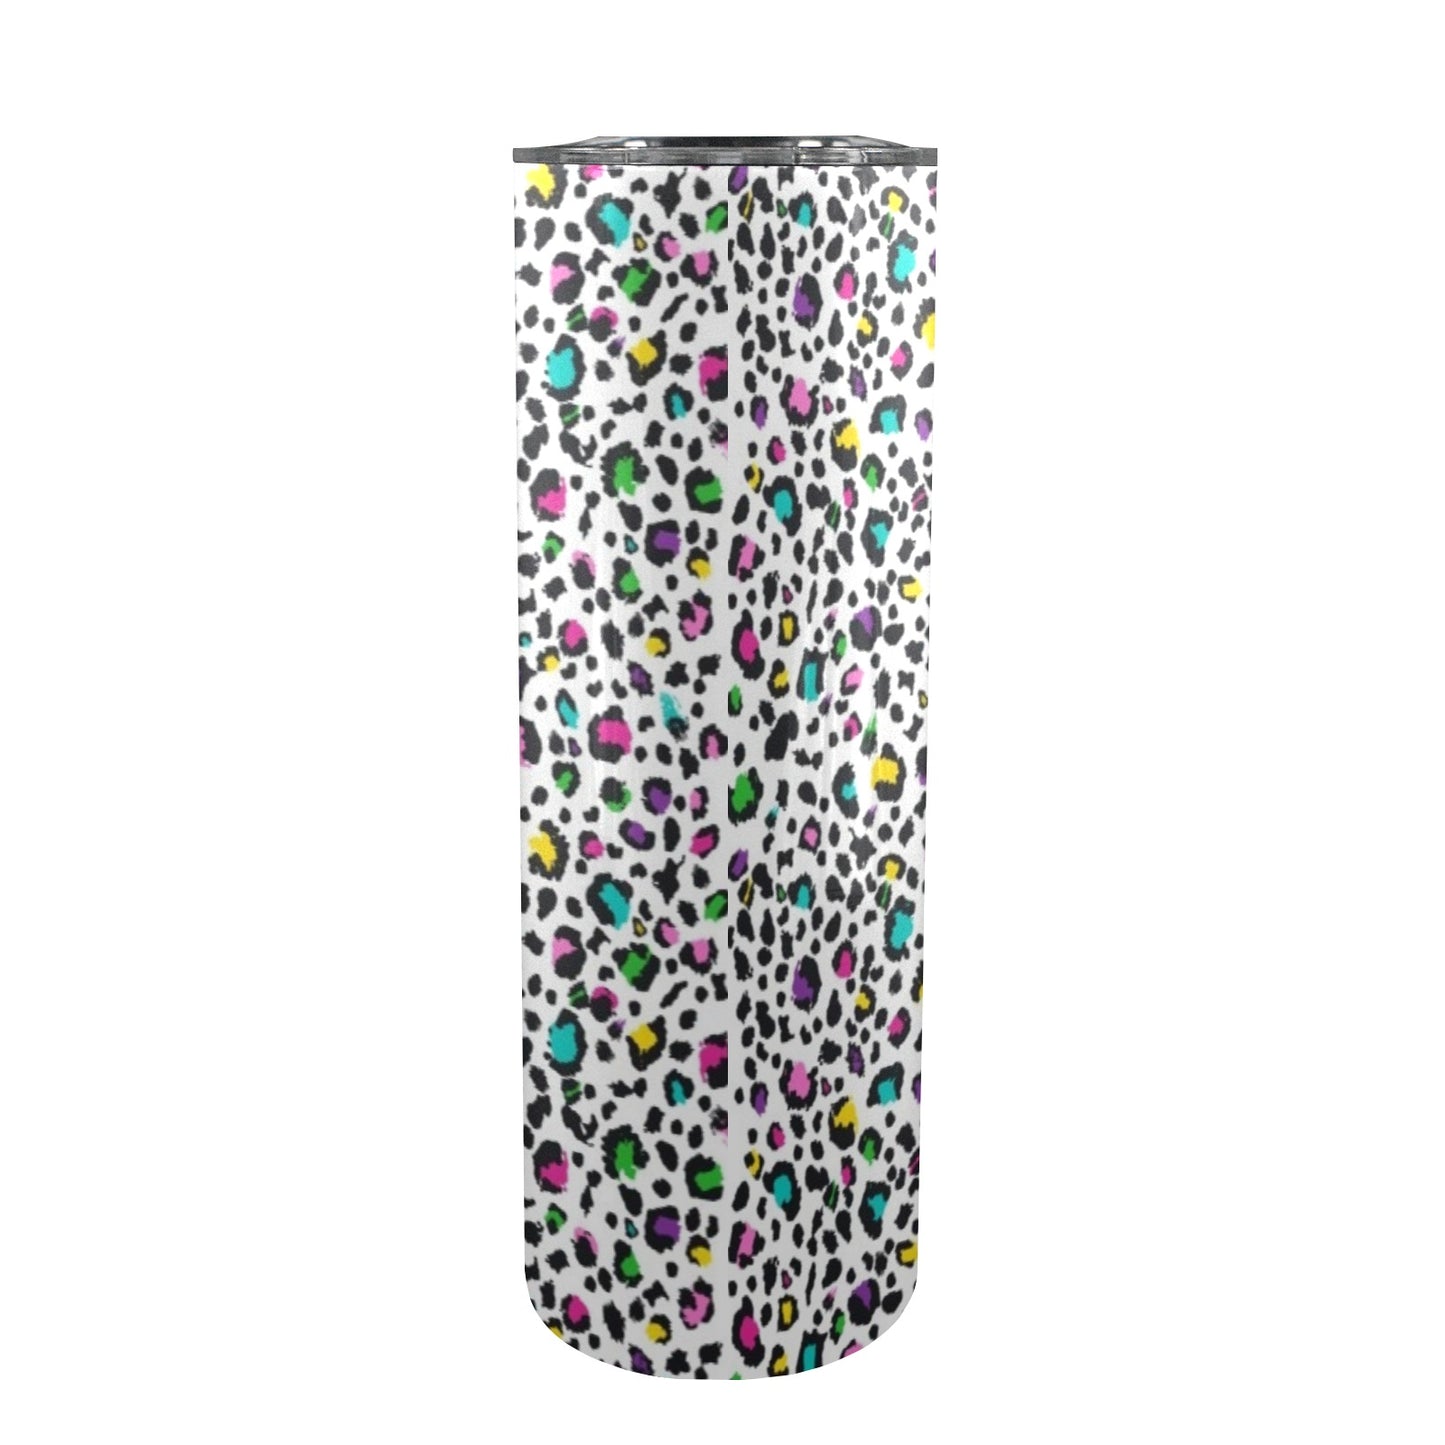 Animal Print In Colour - 20oz Tall Skinny Tumbler with Lid and Straw 20oz Tall Skinny Tumbler with Lid and Straw